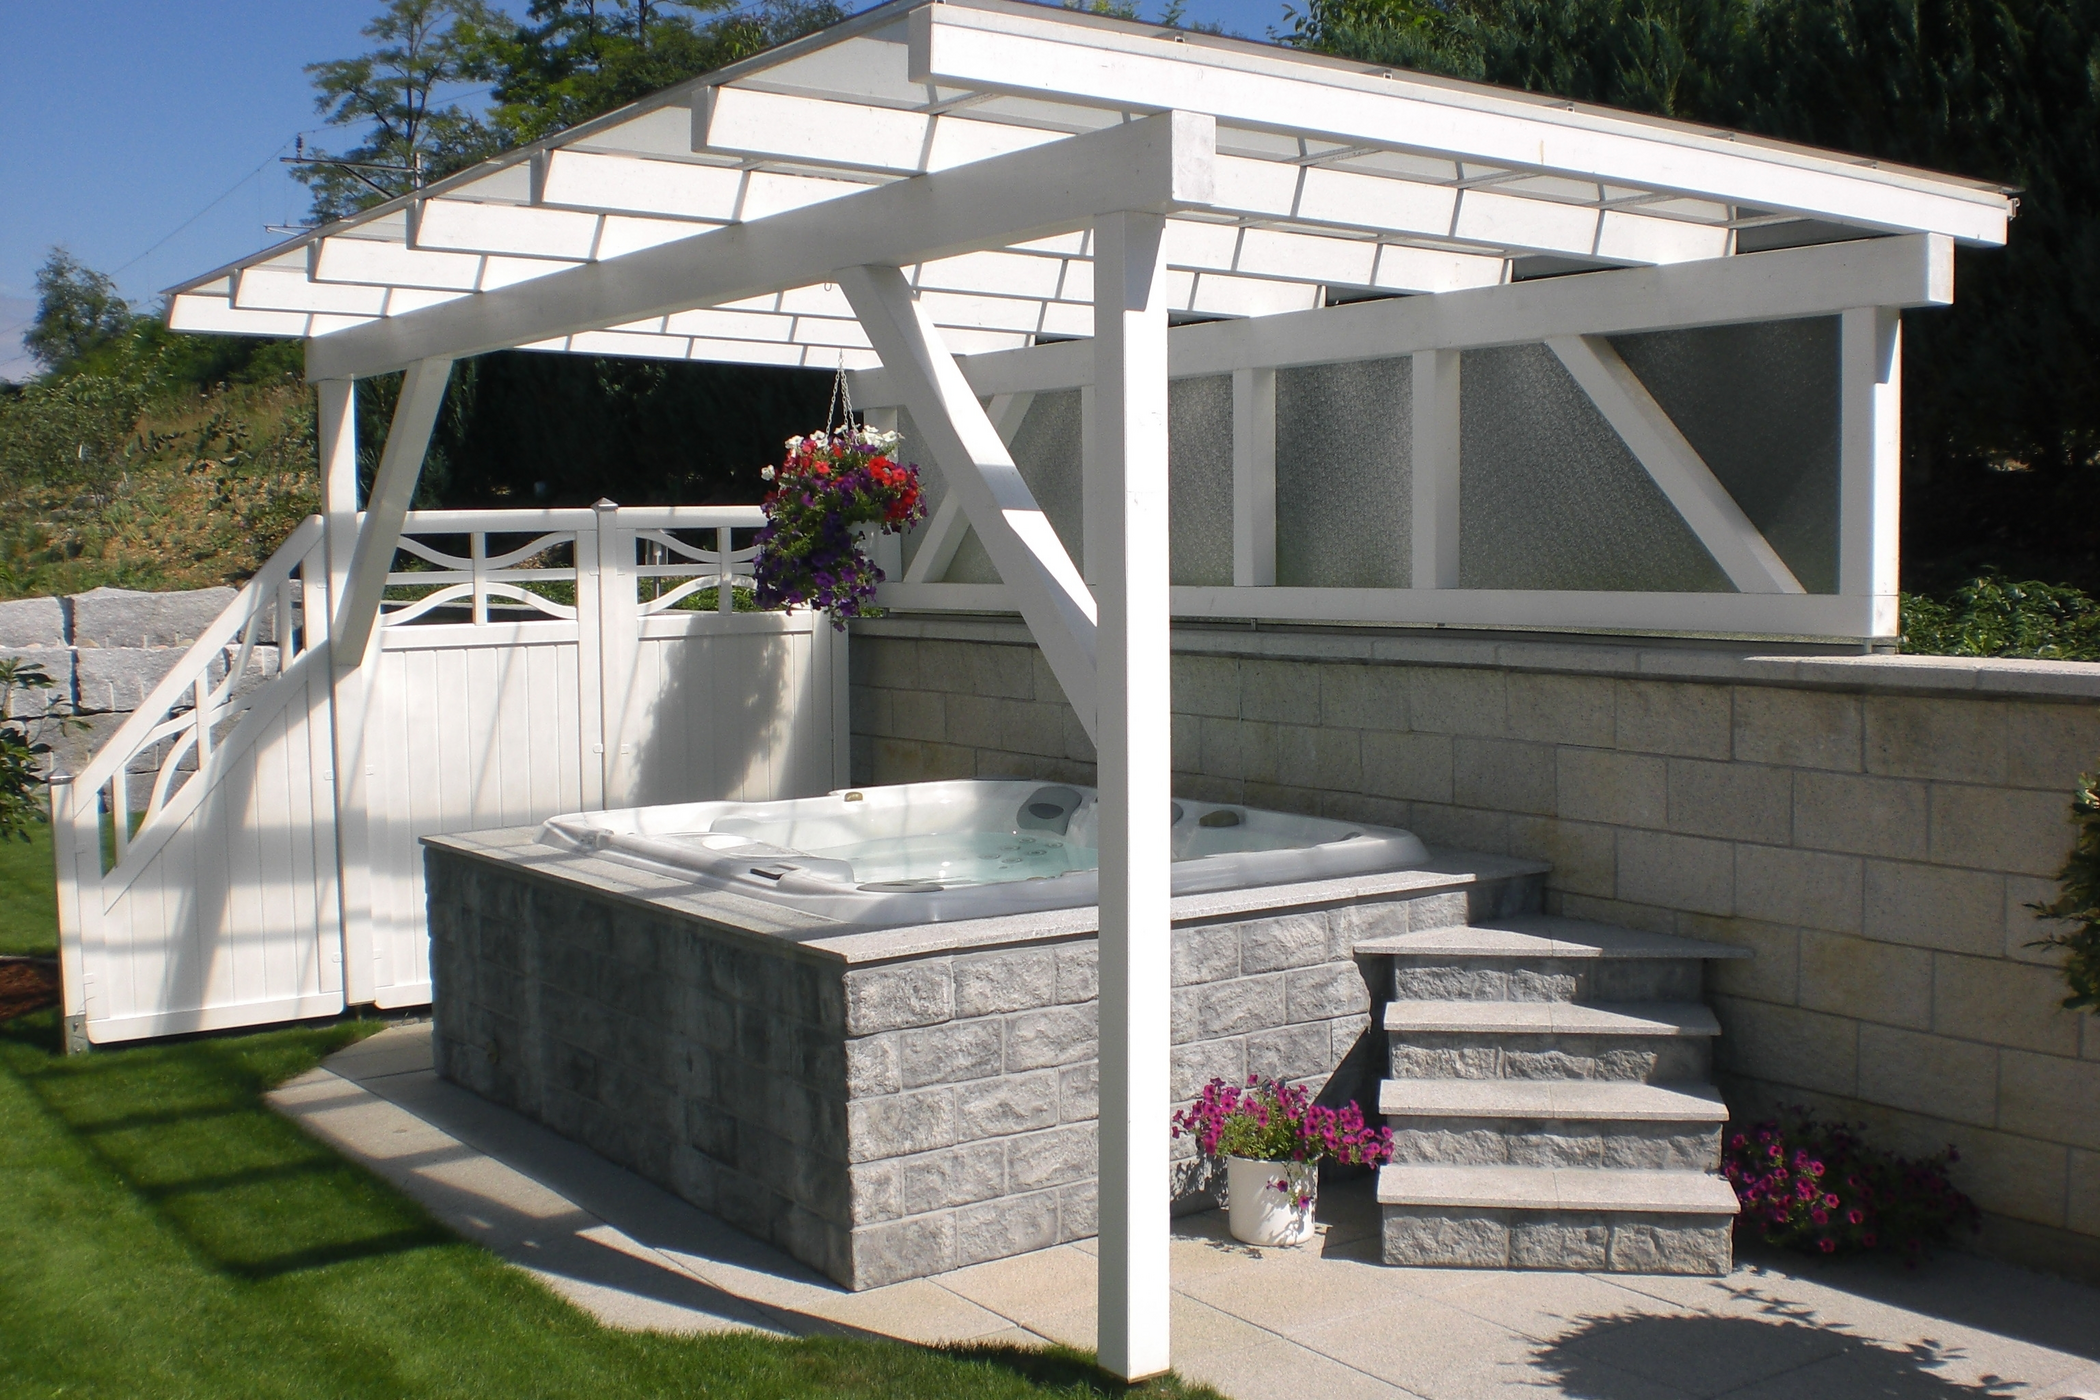 Outdoor hot tub installed underneath a white pergola.